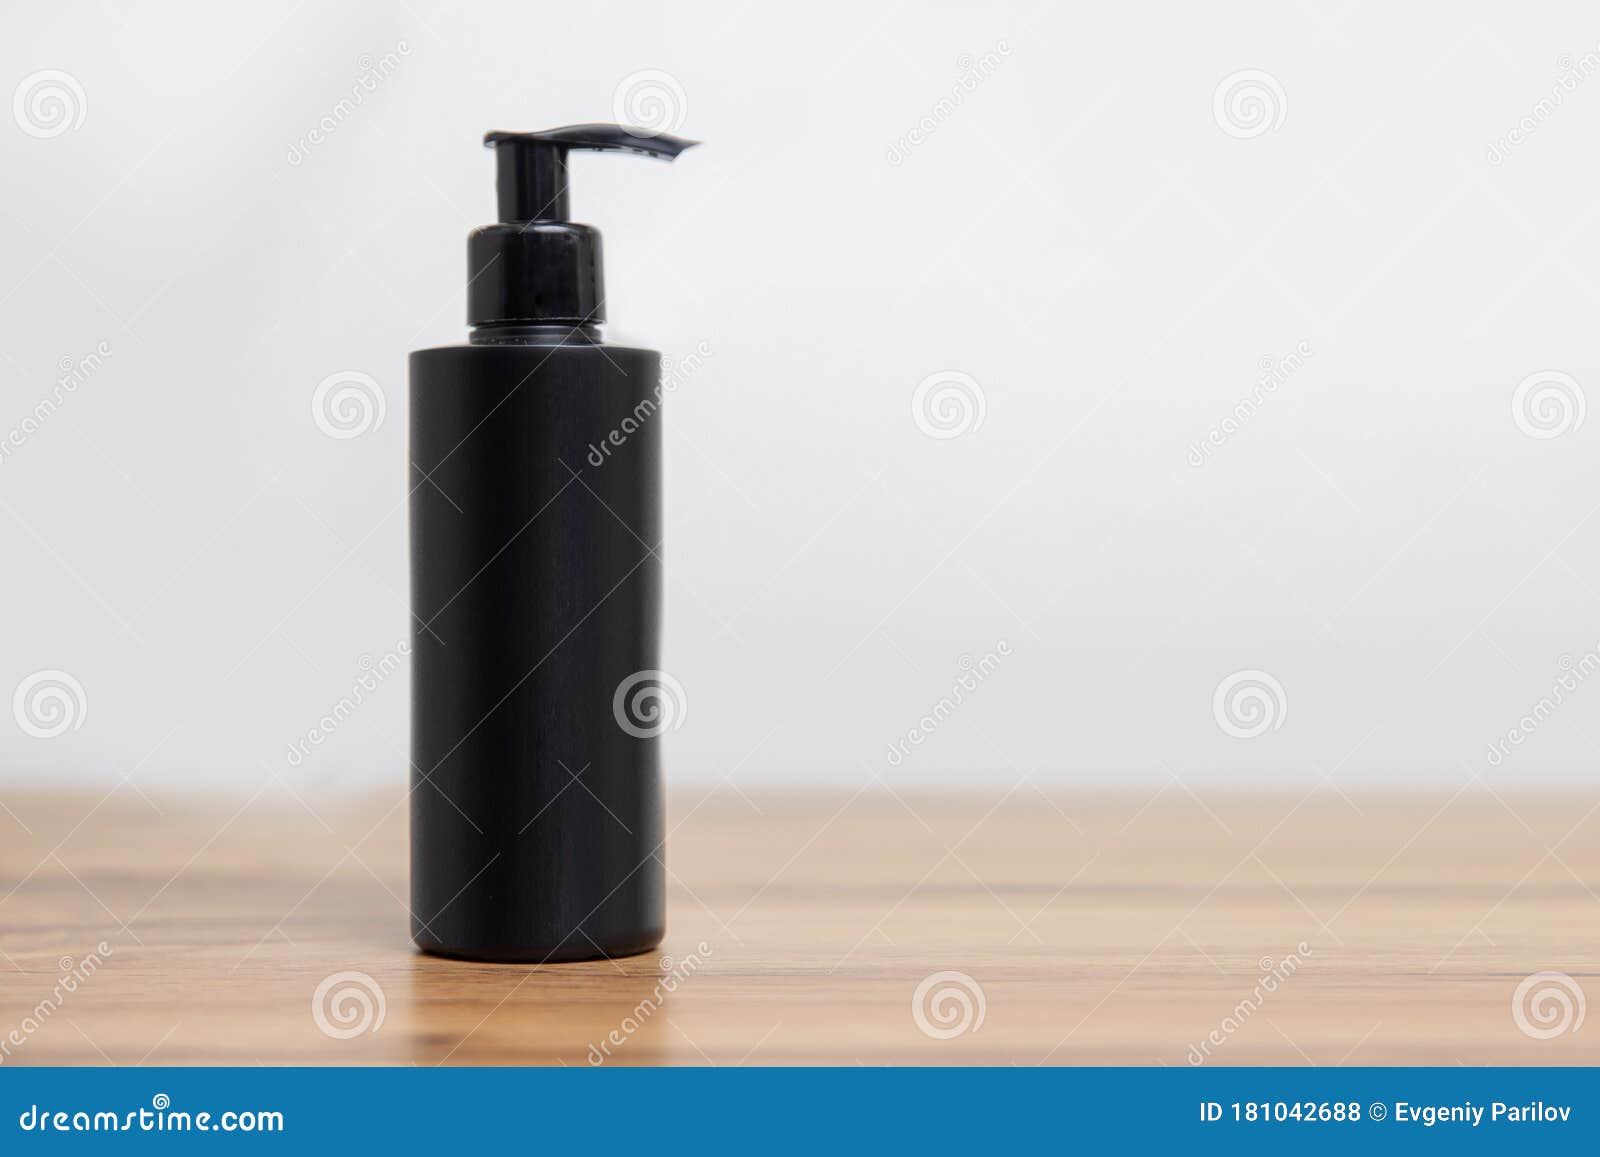 Download Black Bottle Mockup For Cosmetics Shampoo On Simple White ...